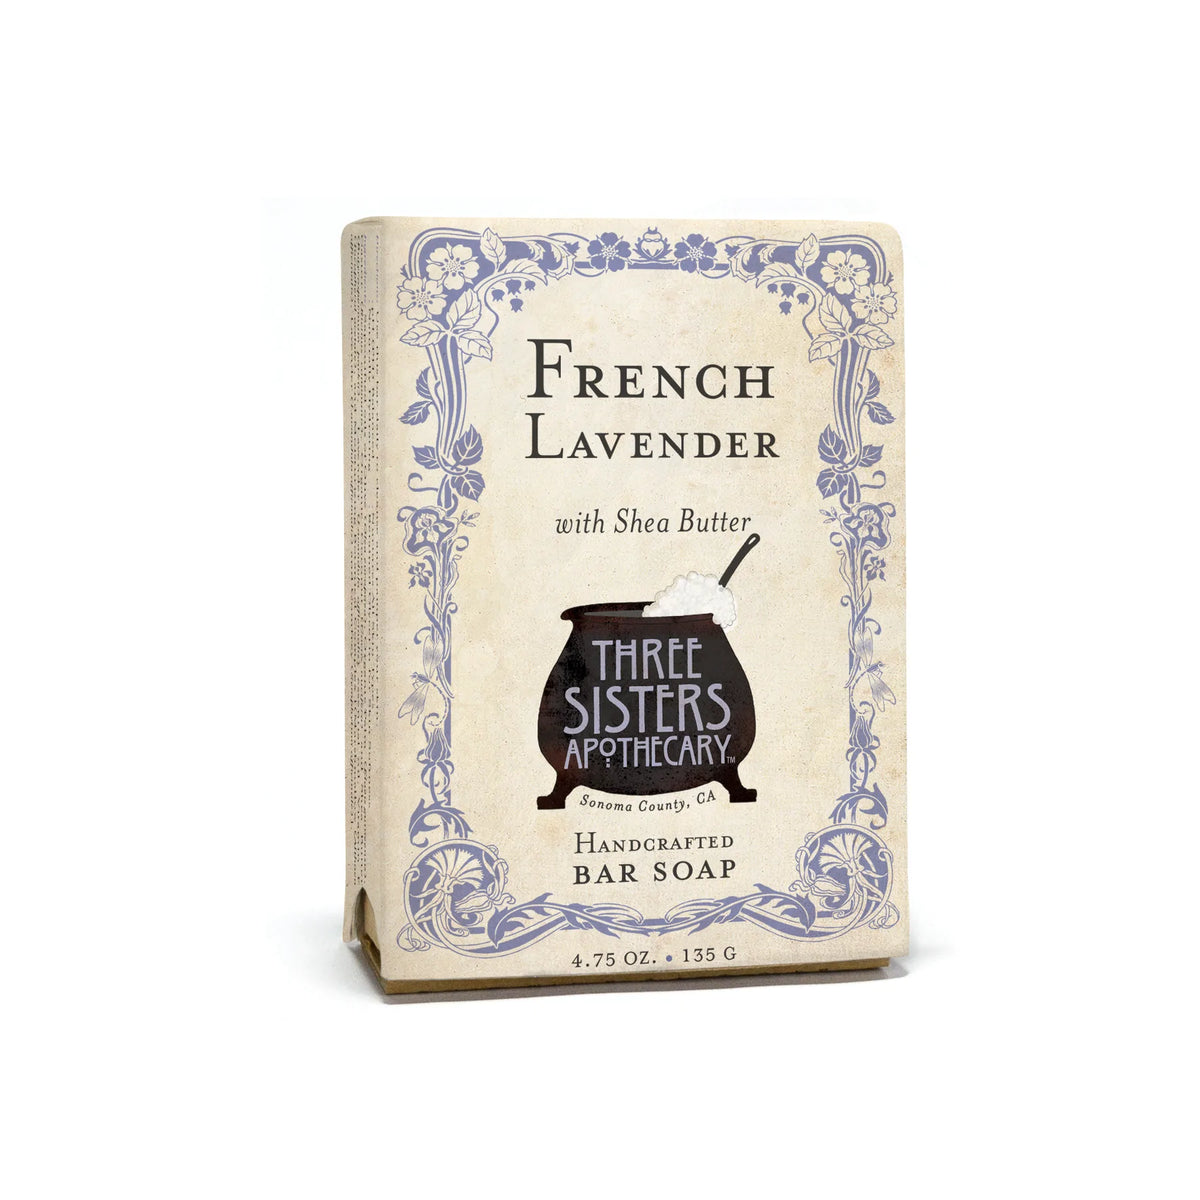 A Three Sisters Apothecary French Lavender Bar Soap with shea butter, featuring elegant floral and scroll designs on its paper packaging.